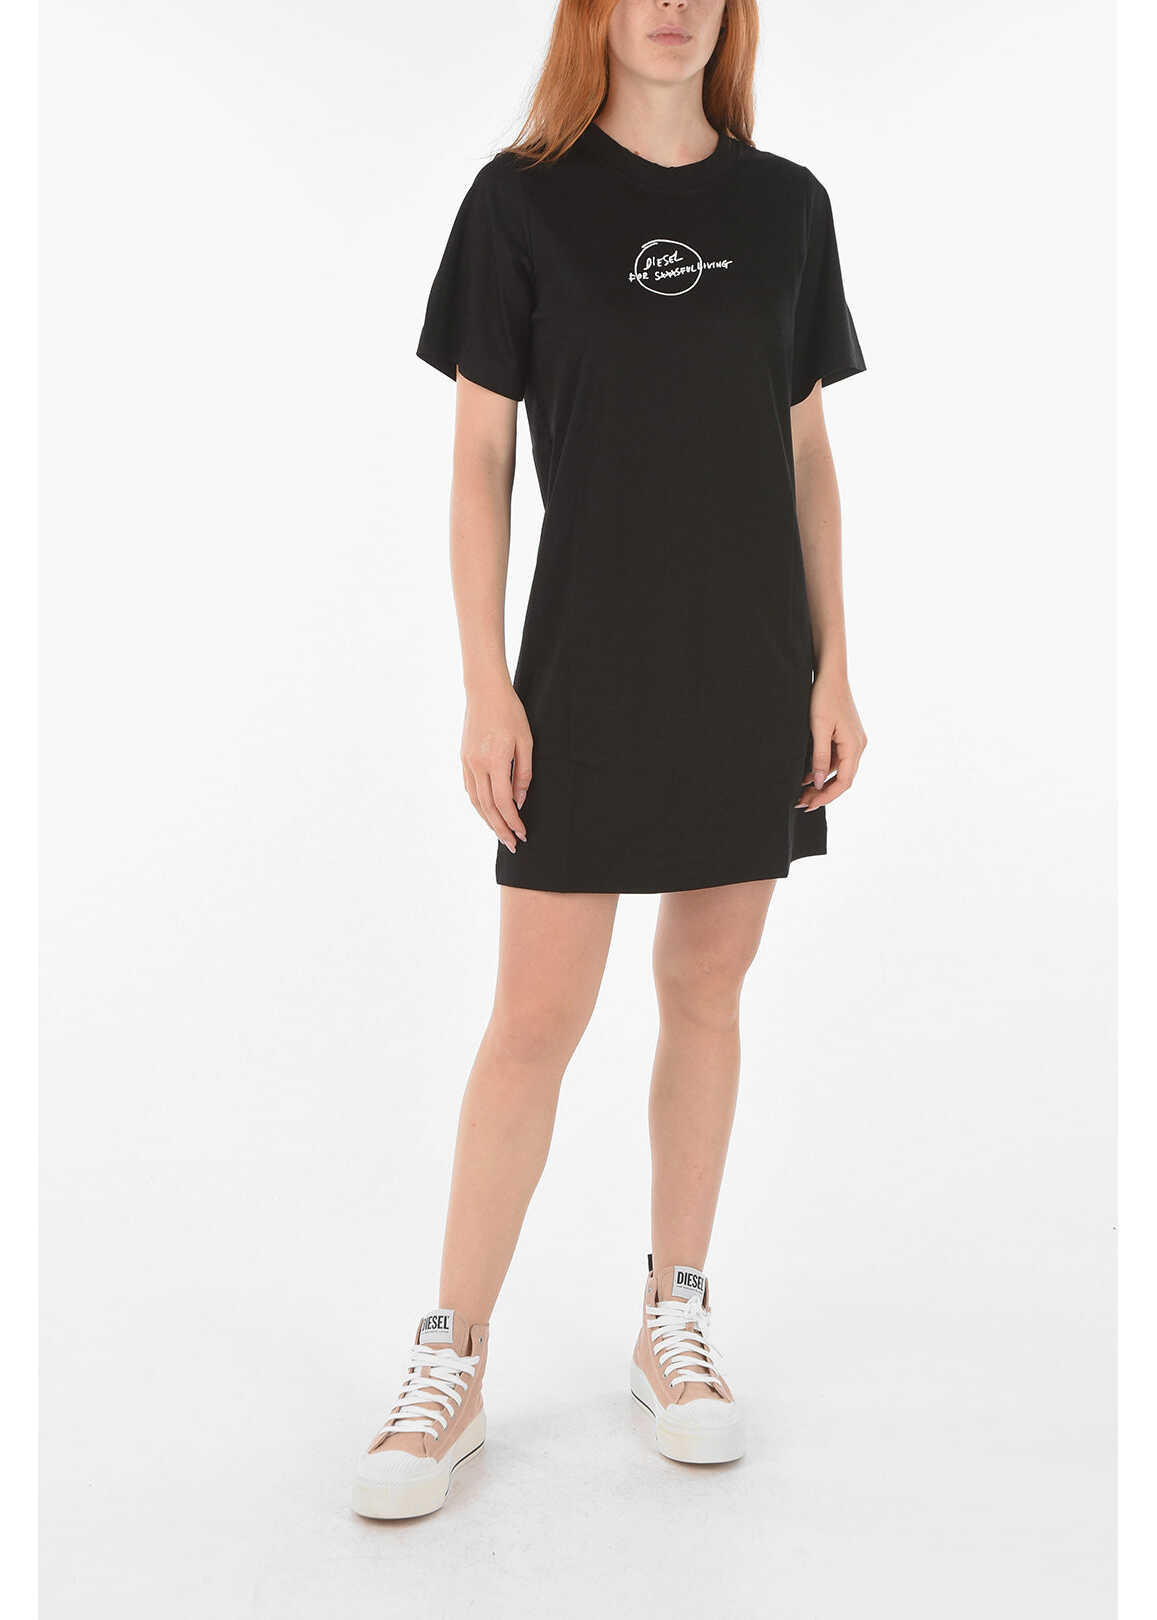 Diesel Embroidered Logo On The Front Solid Color D-Rio Dress Black image9